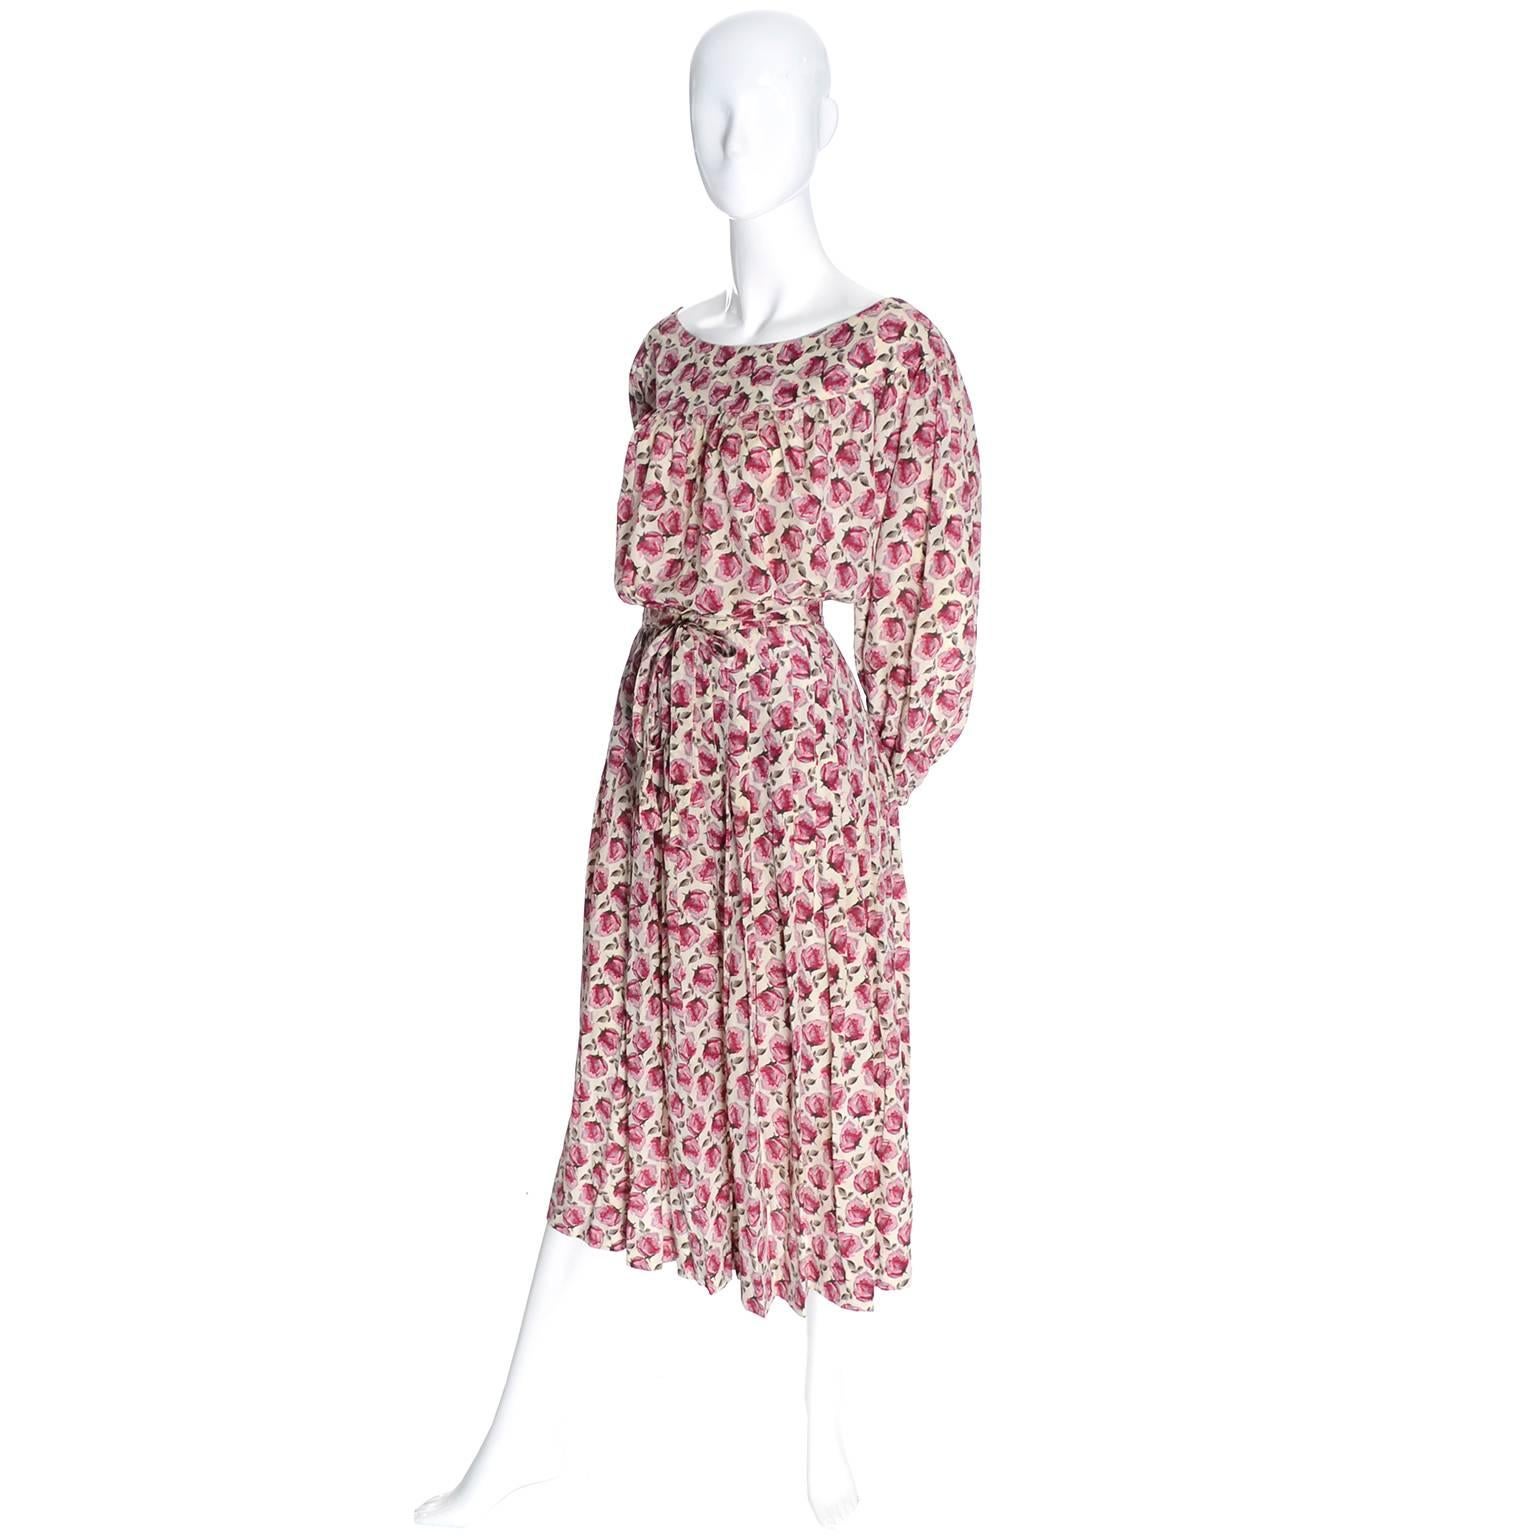 This is a pretty 2 piece dress from Yves Saint Laurent in a beautiful rose print silk fabric.  The blousy peasant top has a ballerina neckline and slips over the head. The skirt is pleated with a side metal zipper and has its original fabric belt. 